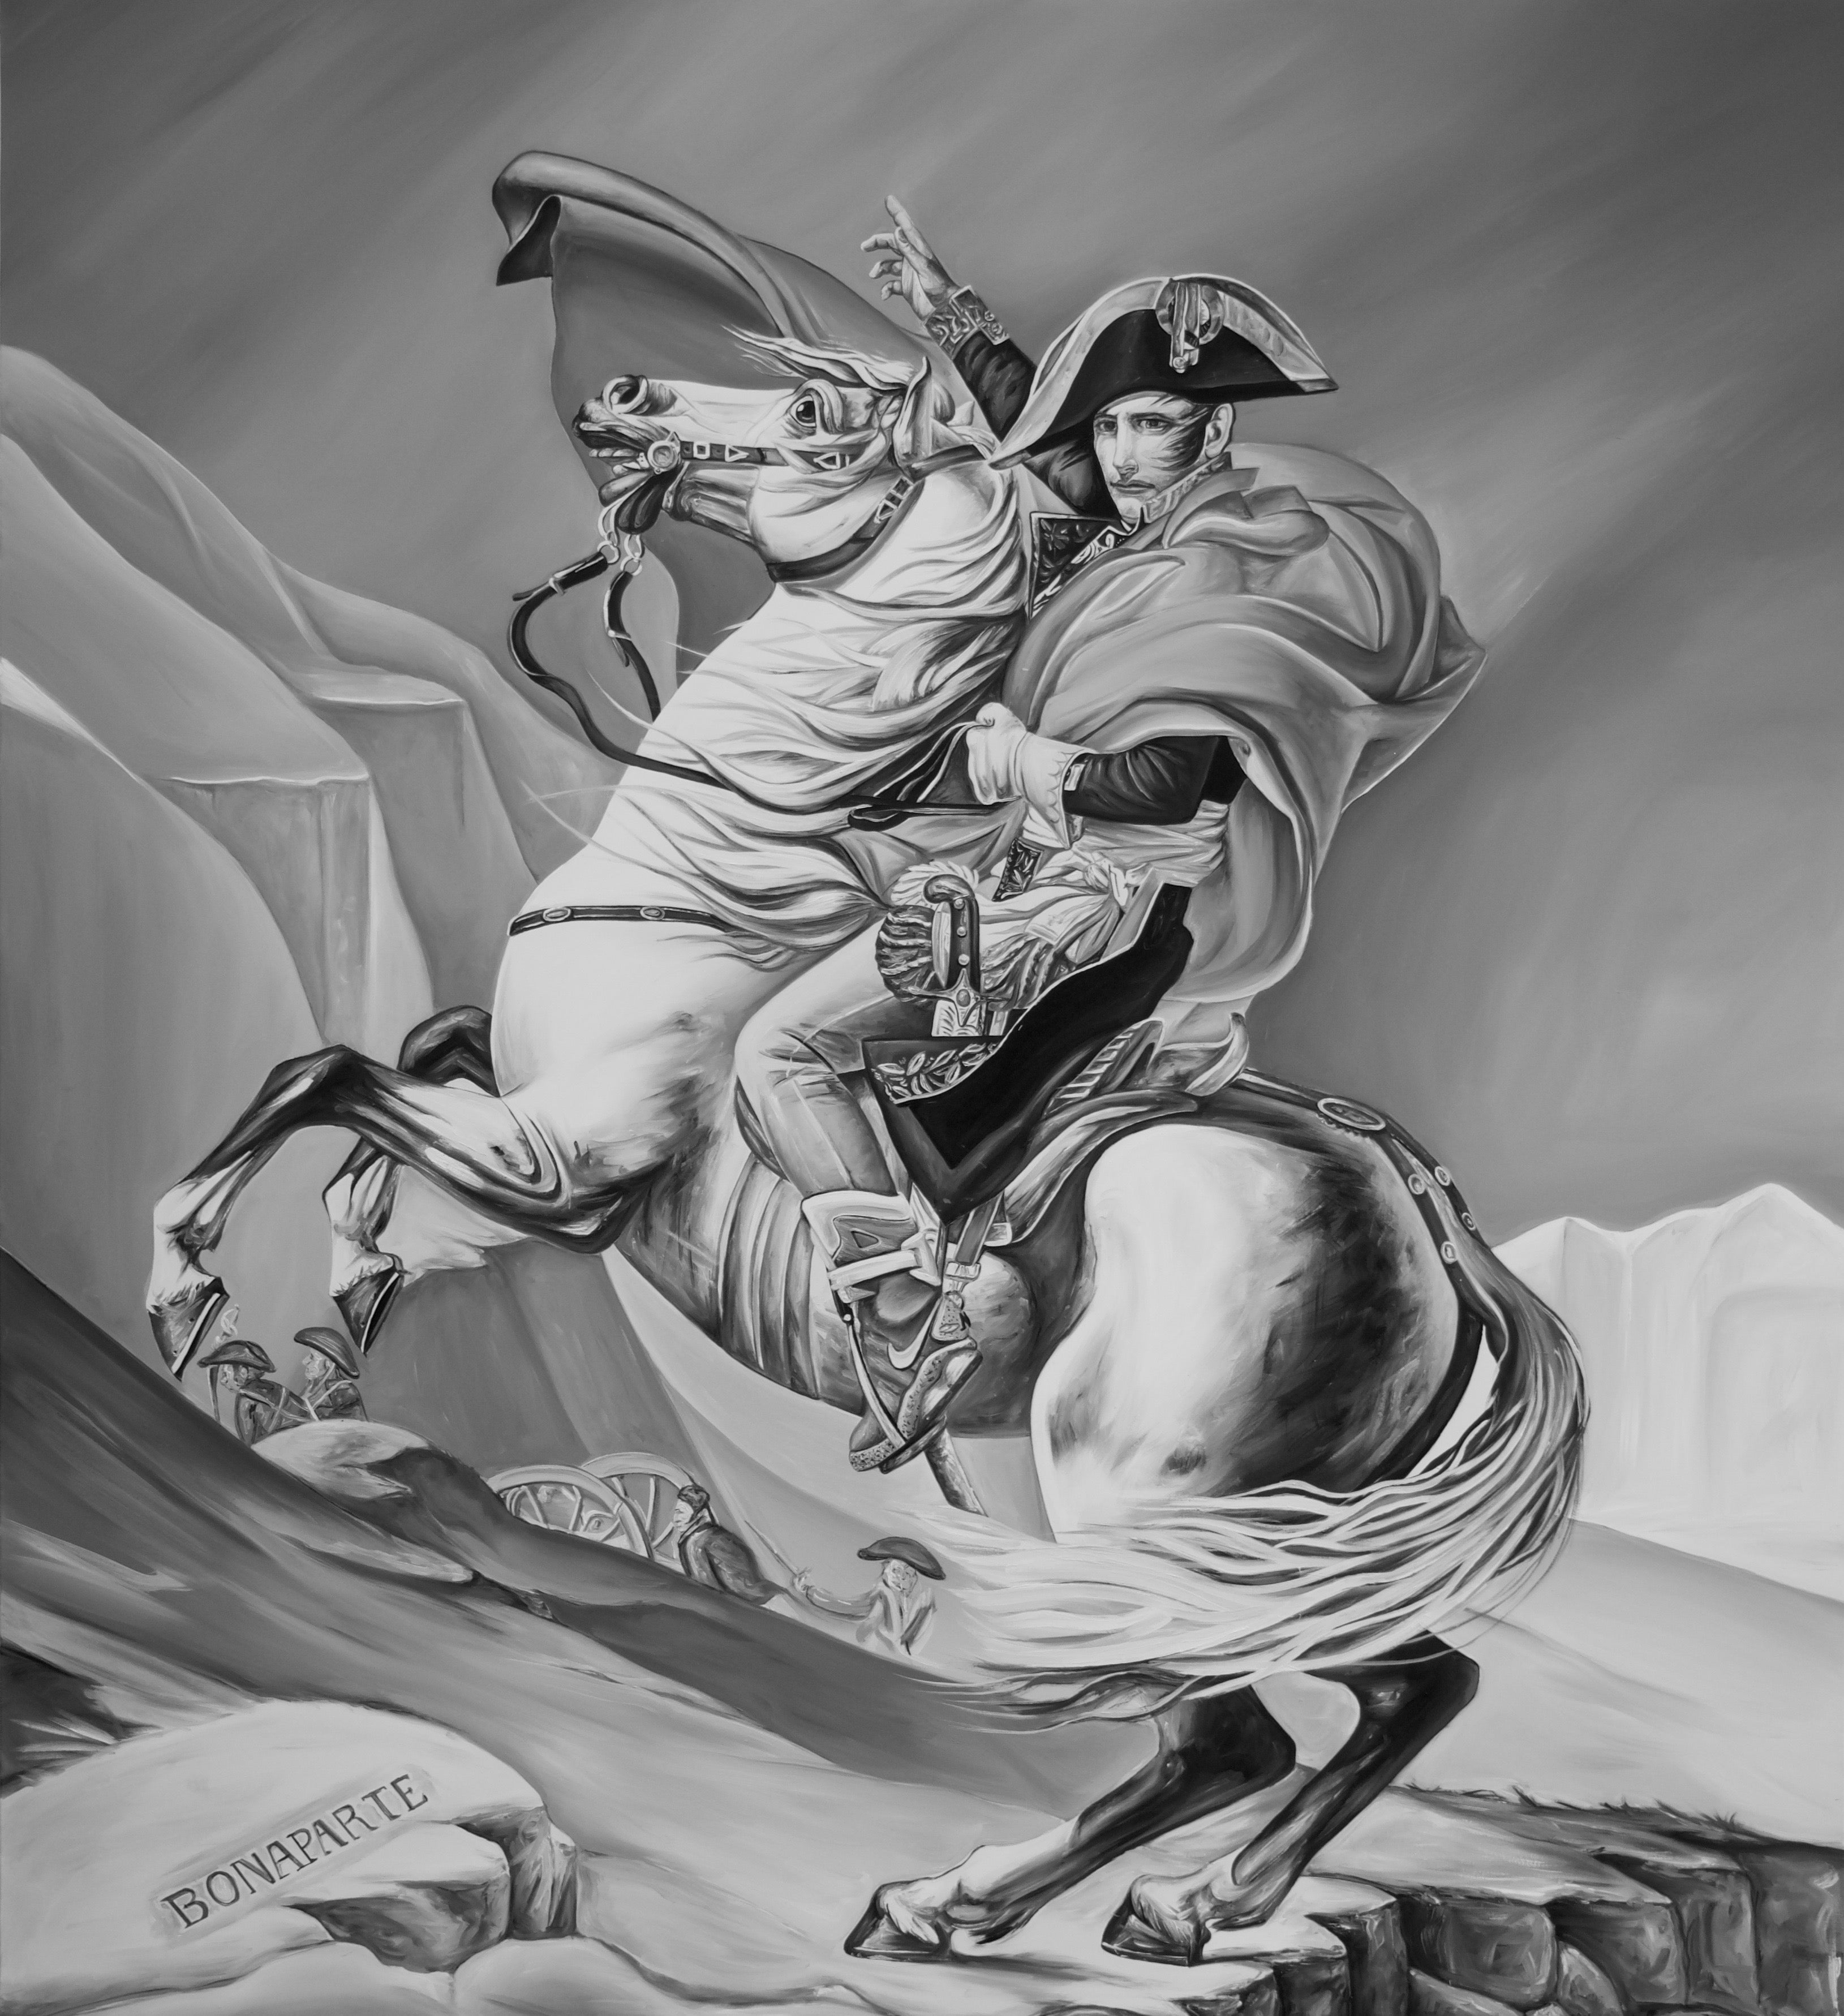 NAPOLEON CROSSING THE ALPS (PAINTING)